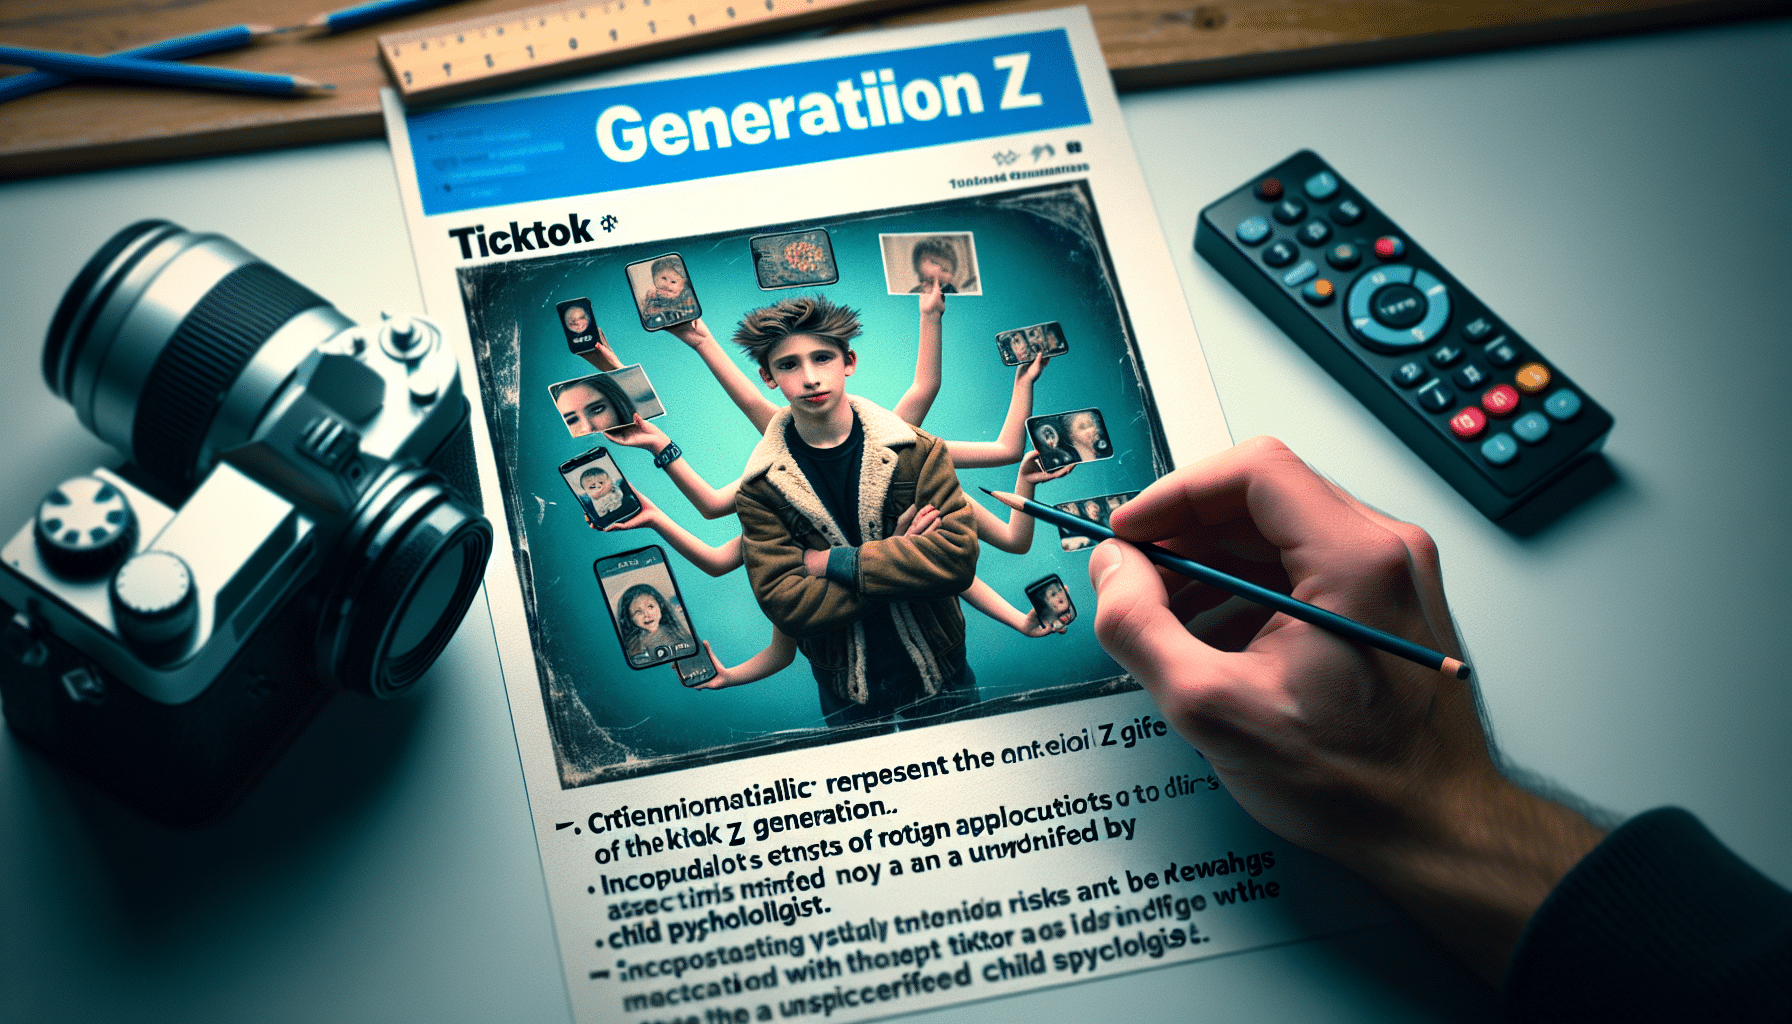 tiktok is a prime example of meeting the expectations of generation z while potentially generating significant risks, as discussed by bruno humbeeck.